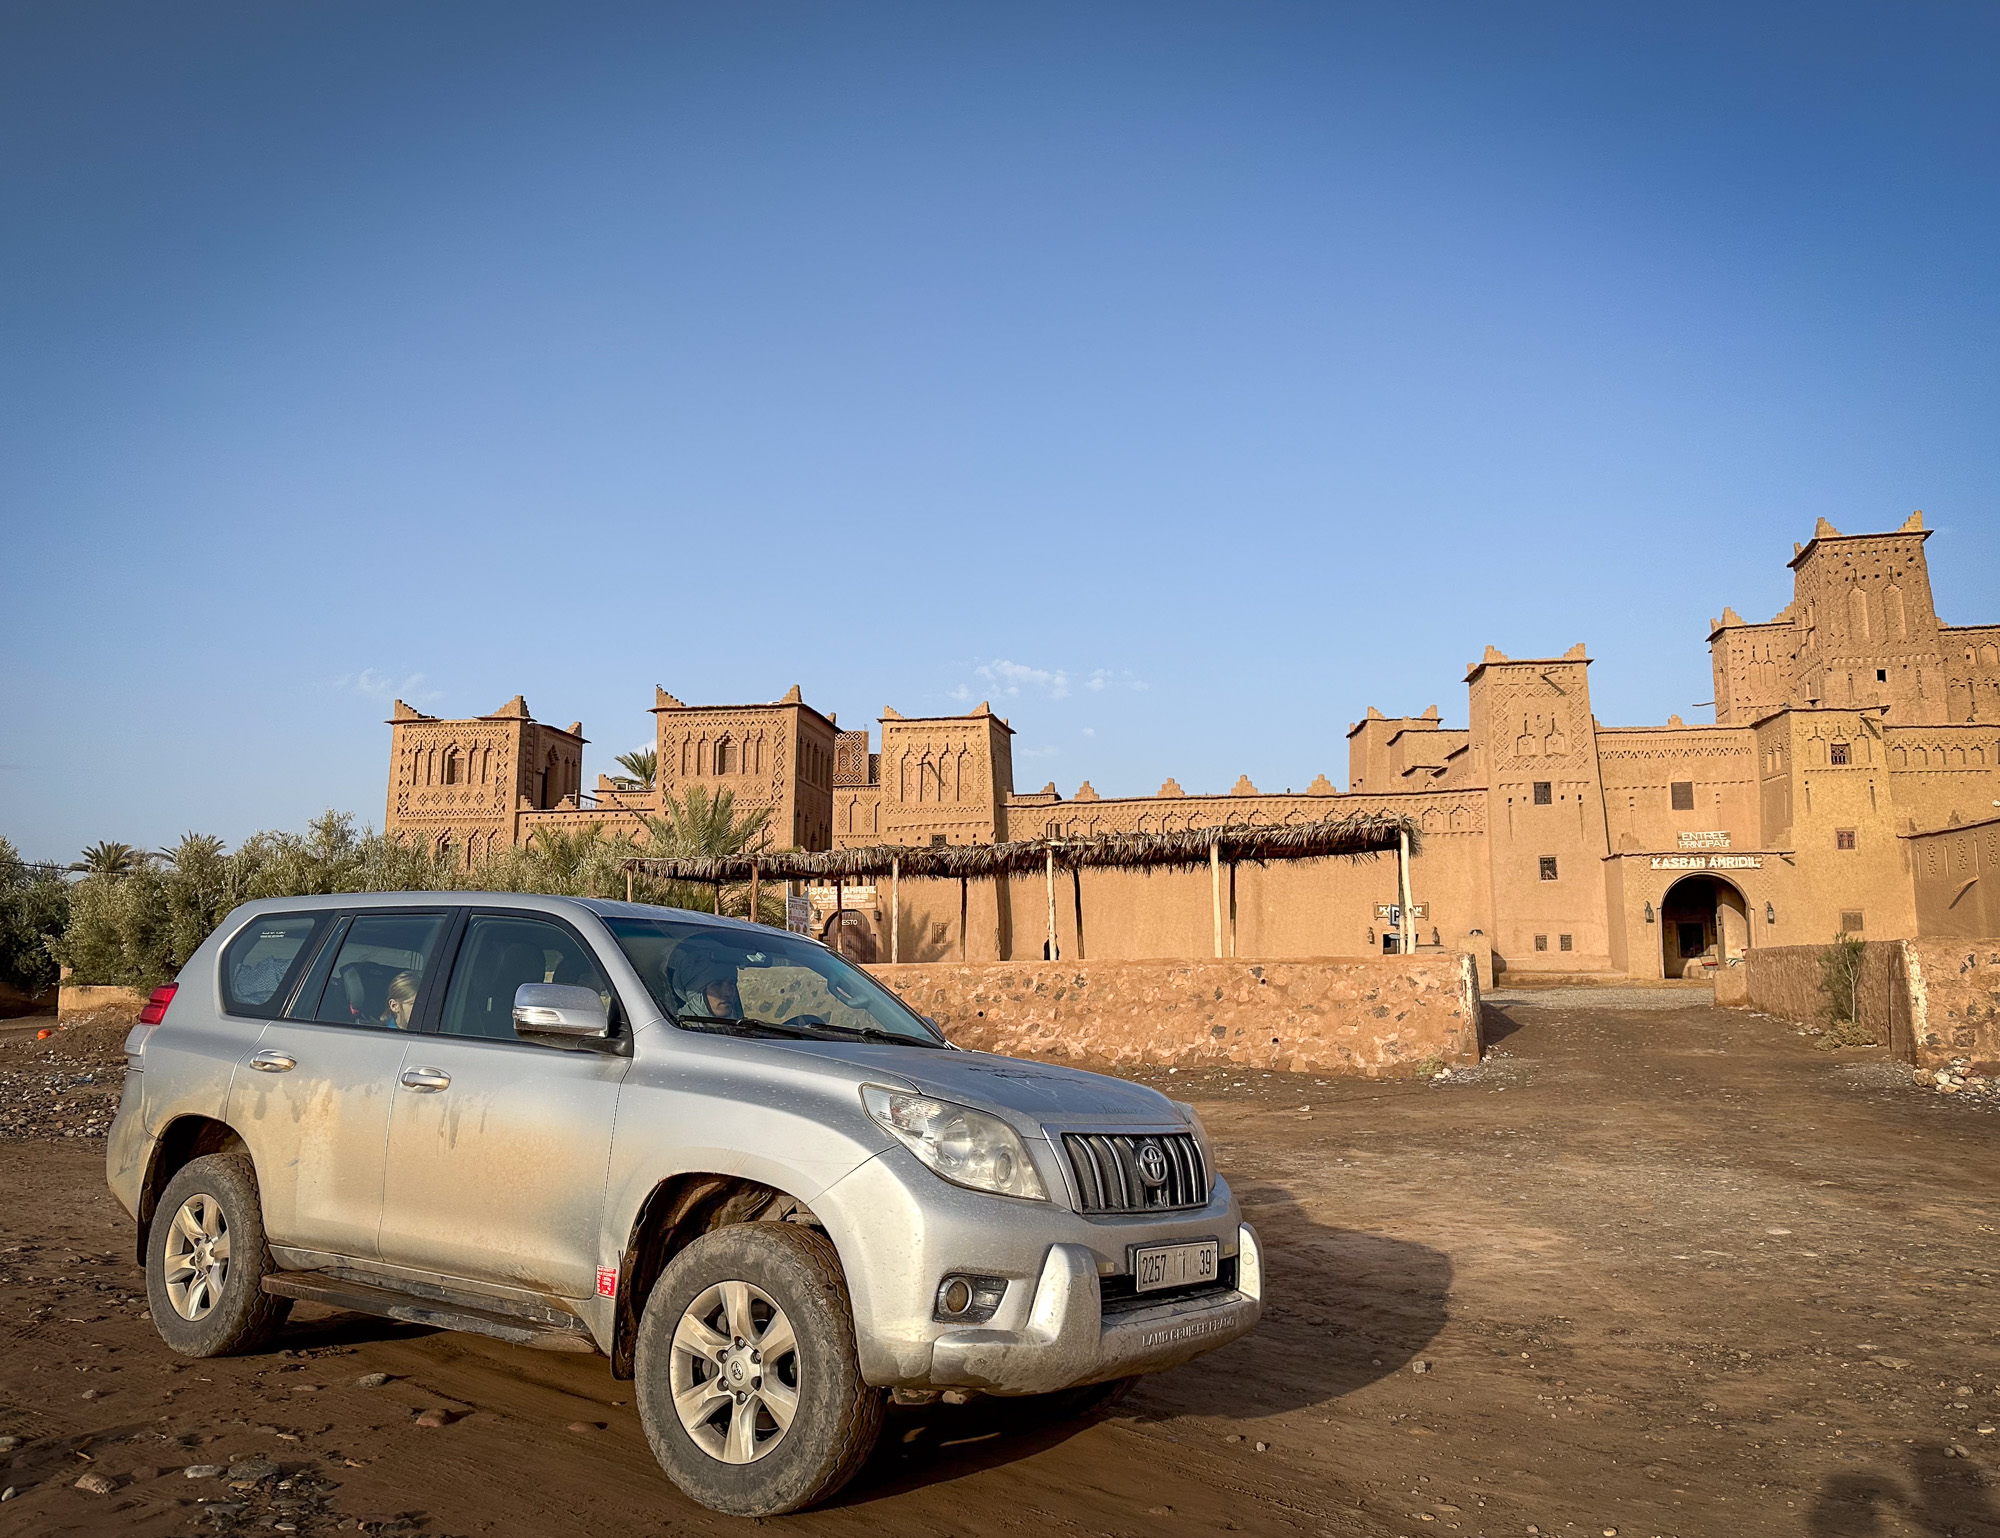 Morocco-Skoura-Moroccan-road-trip-with-car-and-Berber-driver-outside-Kasbah-Amridil with car on a Moroccan road trip